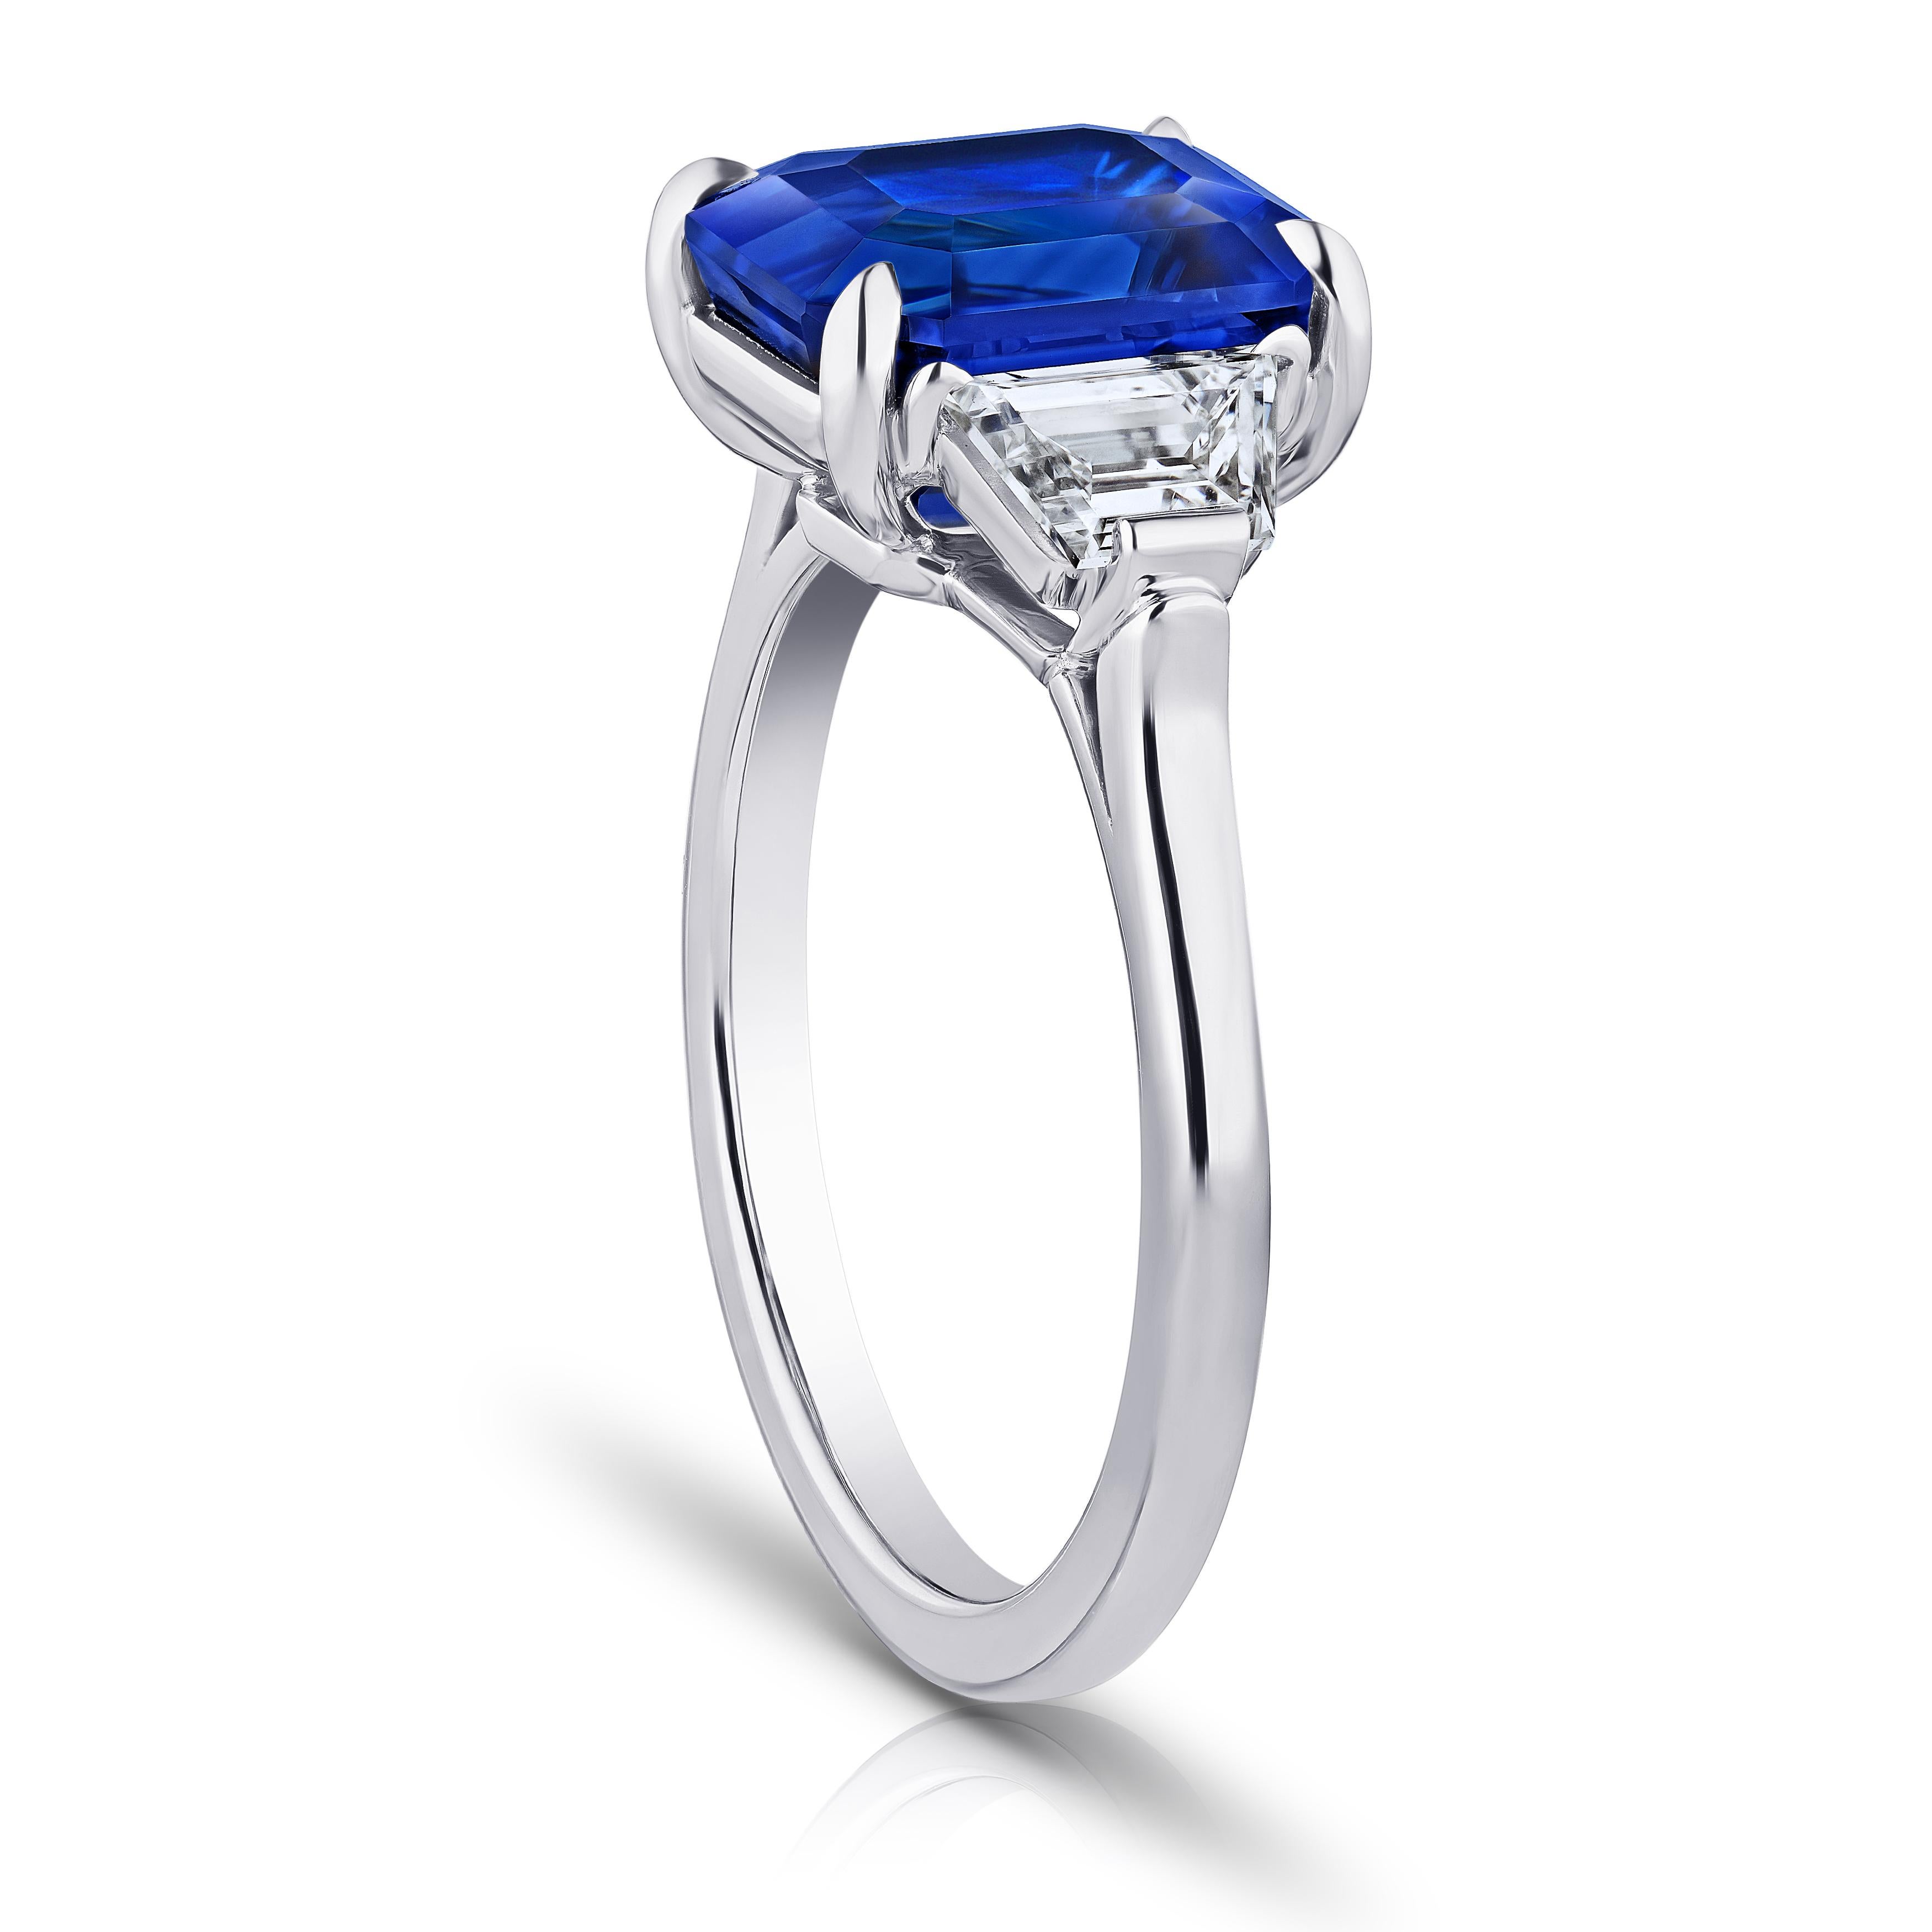 5.08 carat emerald cut blue sapphire with trapezoid diamonds .81 carats set in a platinum ring. Size 7.